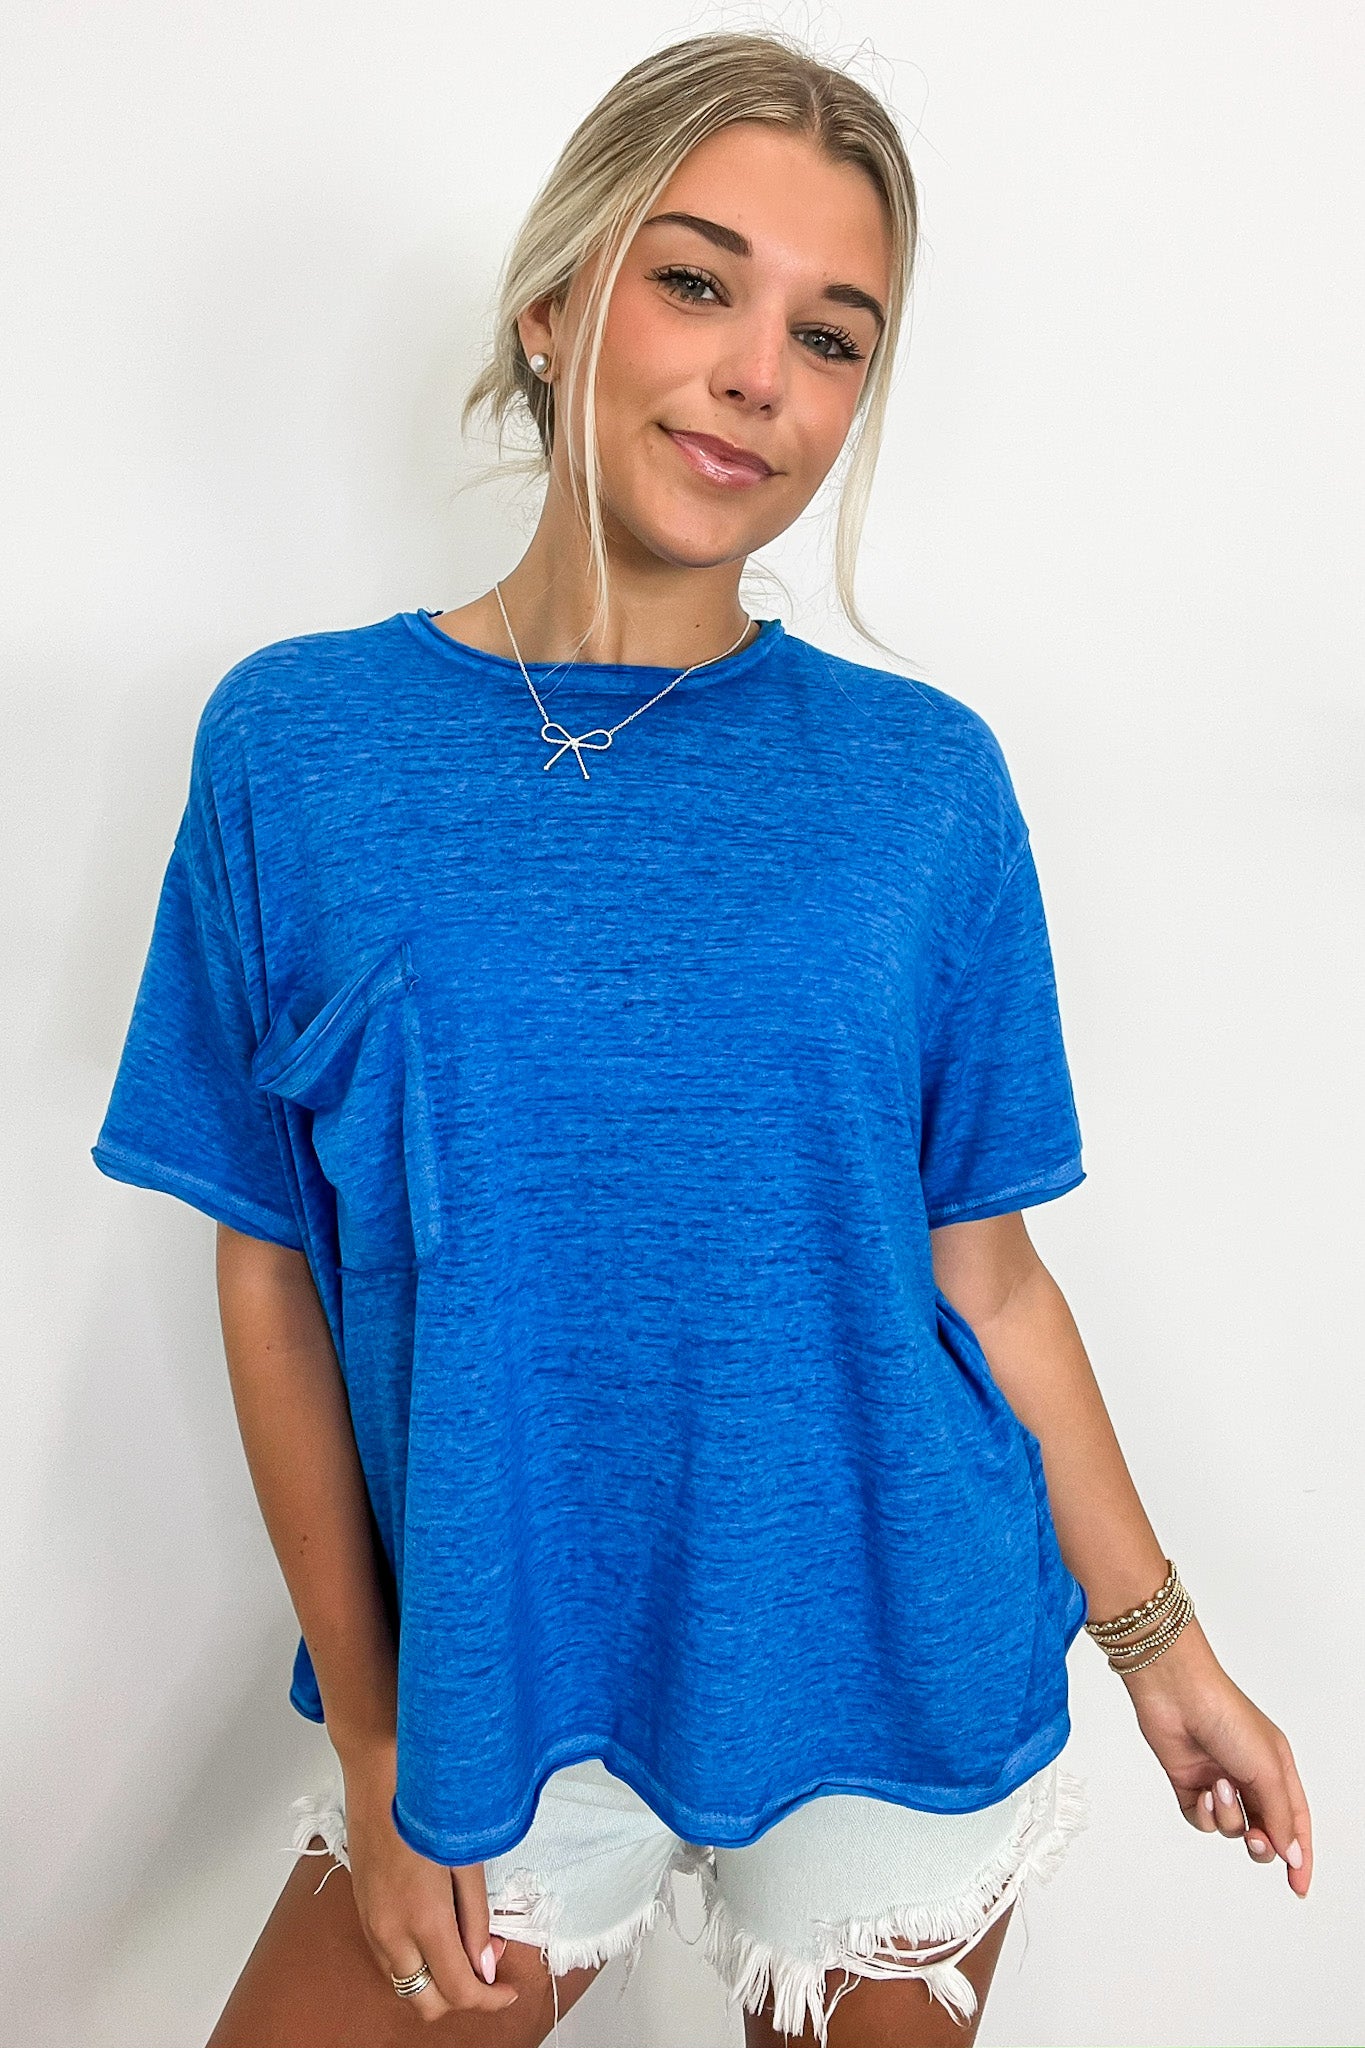 Ocean Blue / SM Marisol Burnout Wash Oversized Pocket Top - Madison and Mallory